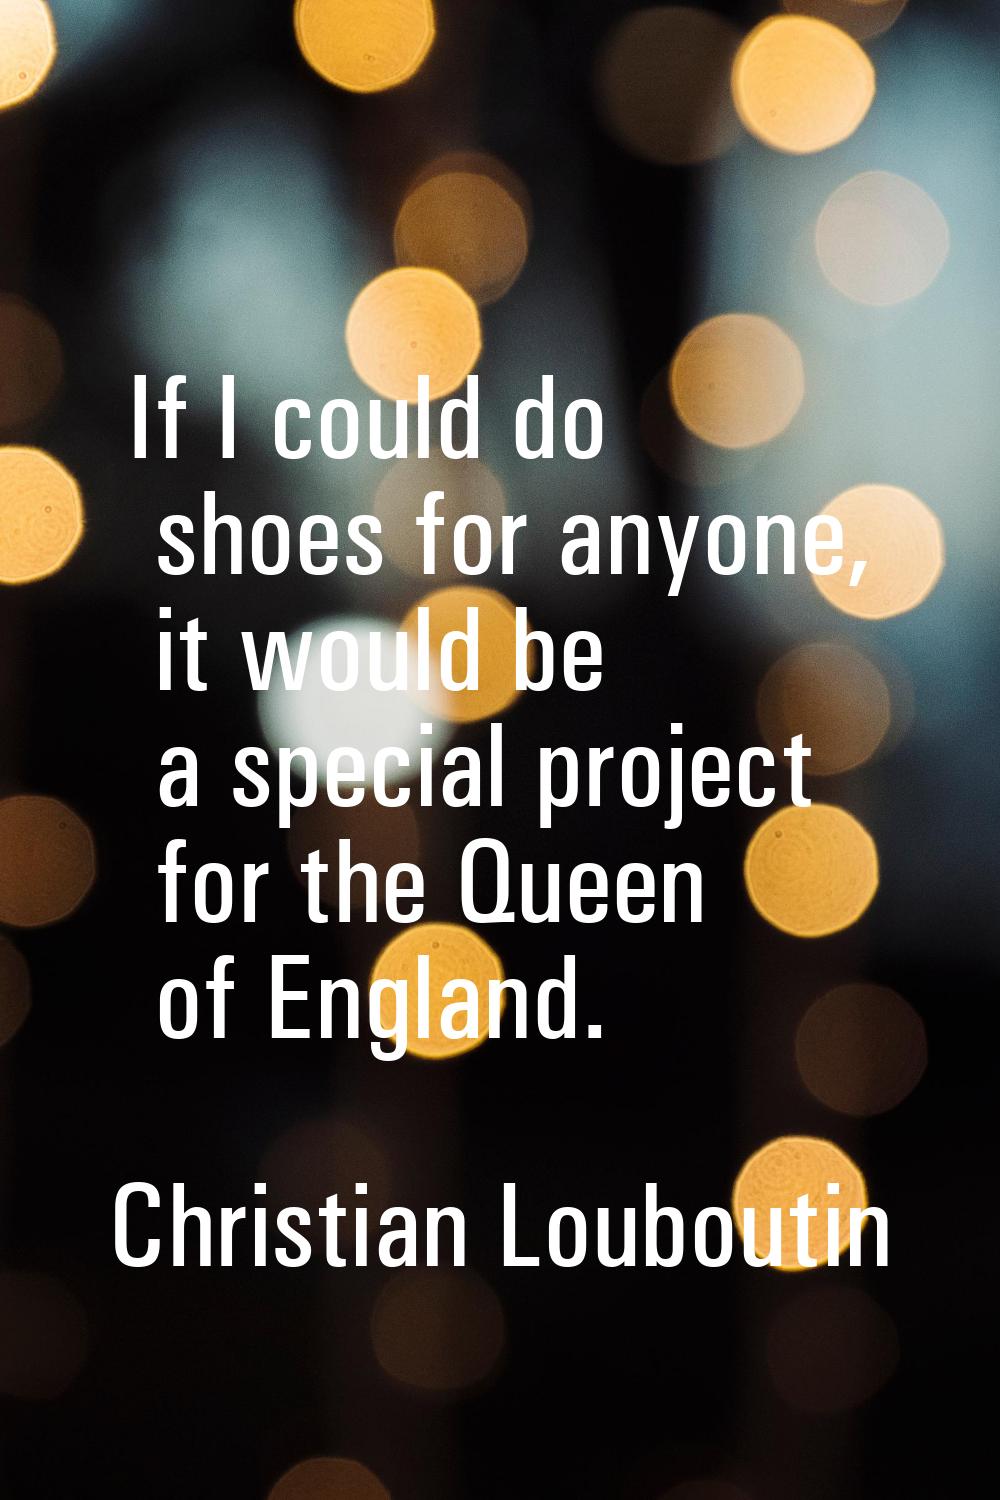 If I could do shoes for anyone, it would be a special project for the Queen of England.